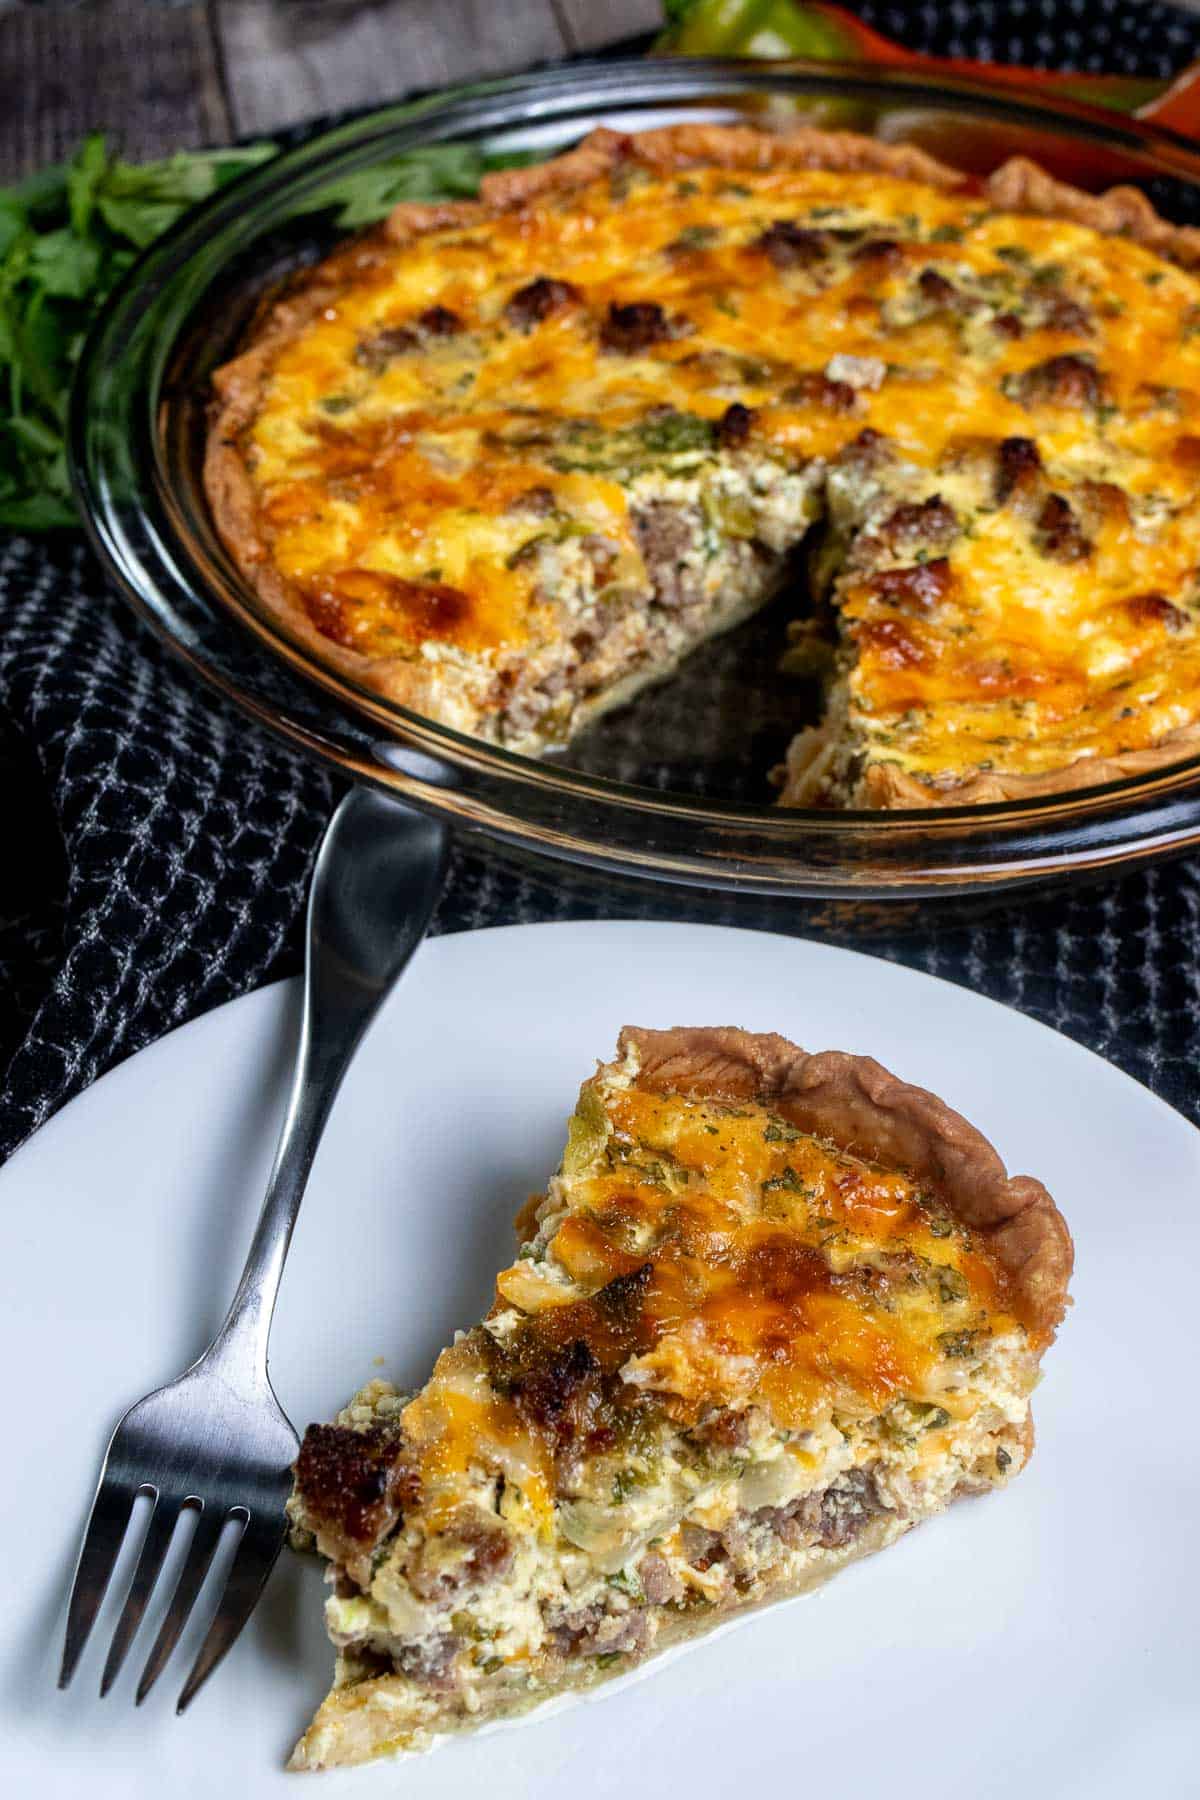 Angled view of Hatch chile sausage quiche in a glass pie dish with a slice on a white plate in front of it.